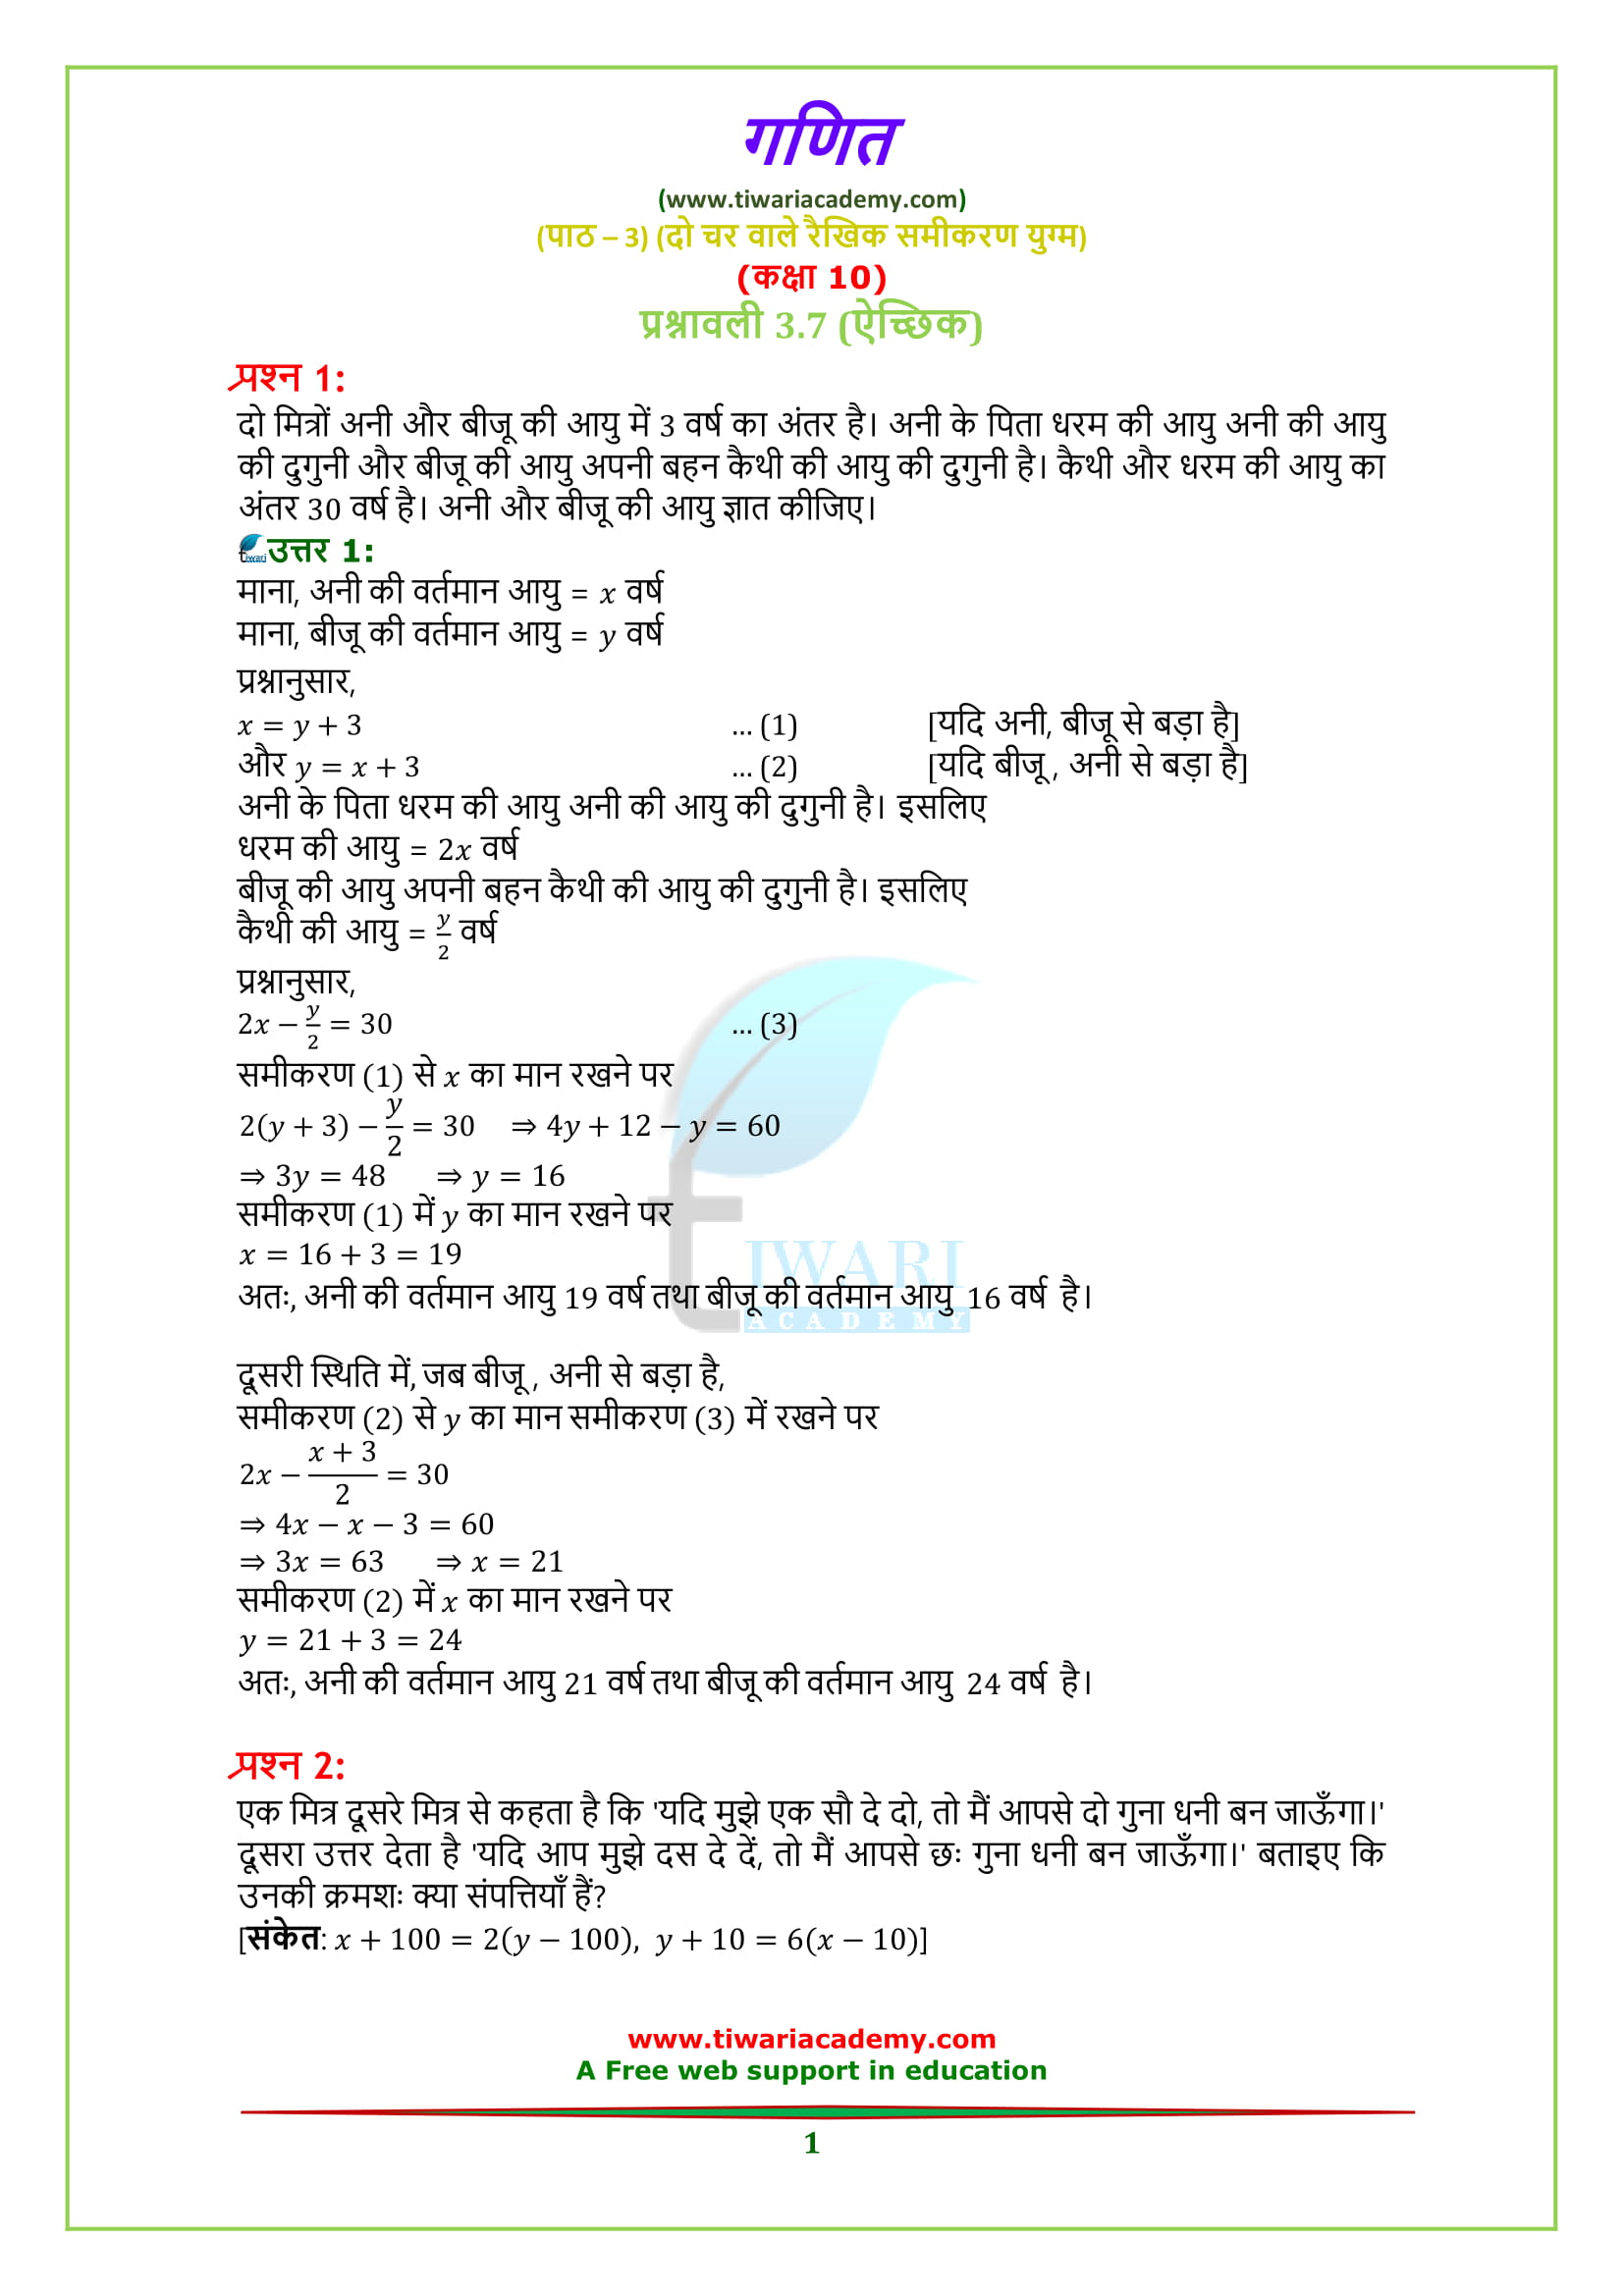 NCERT Solutions for class 10 Maths Chapter 3 Exercise 3.7 in Hindi